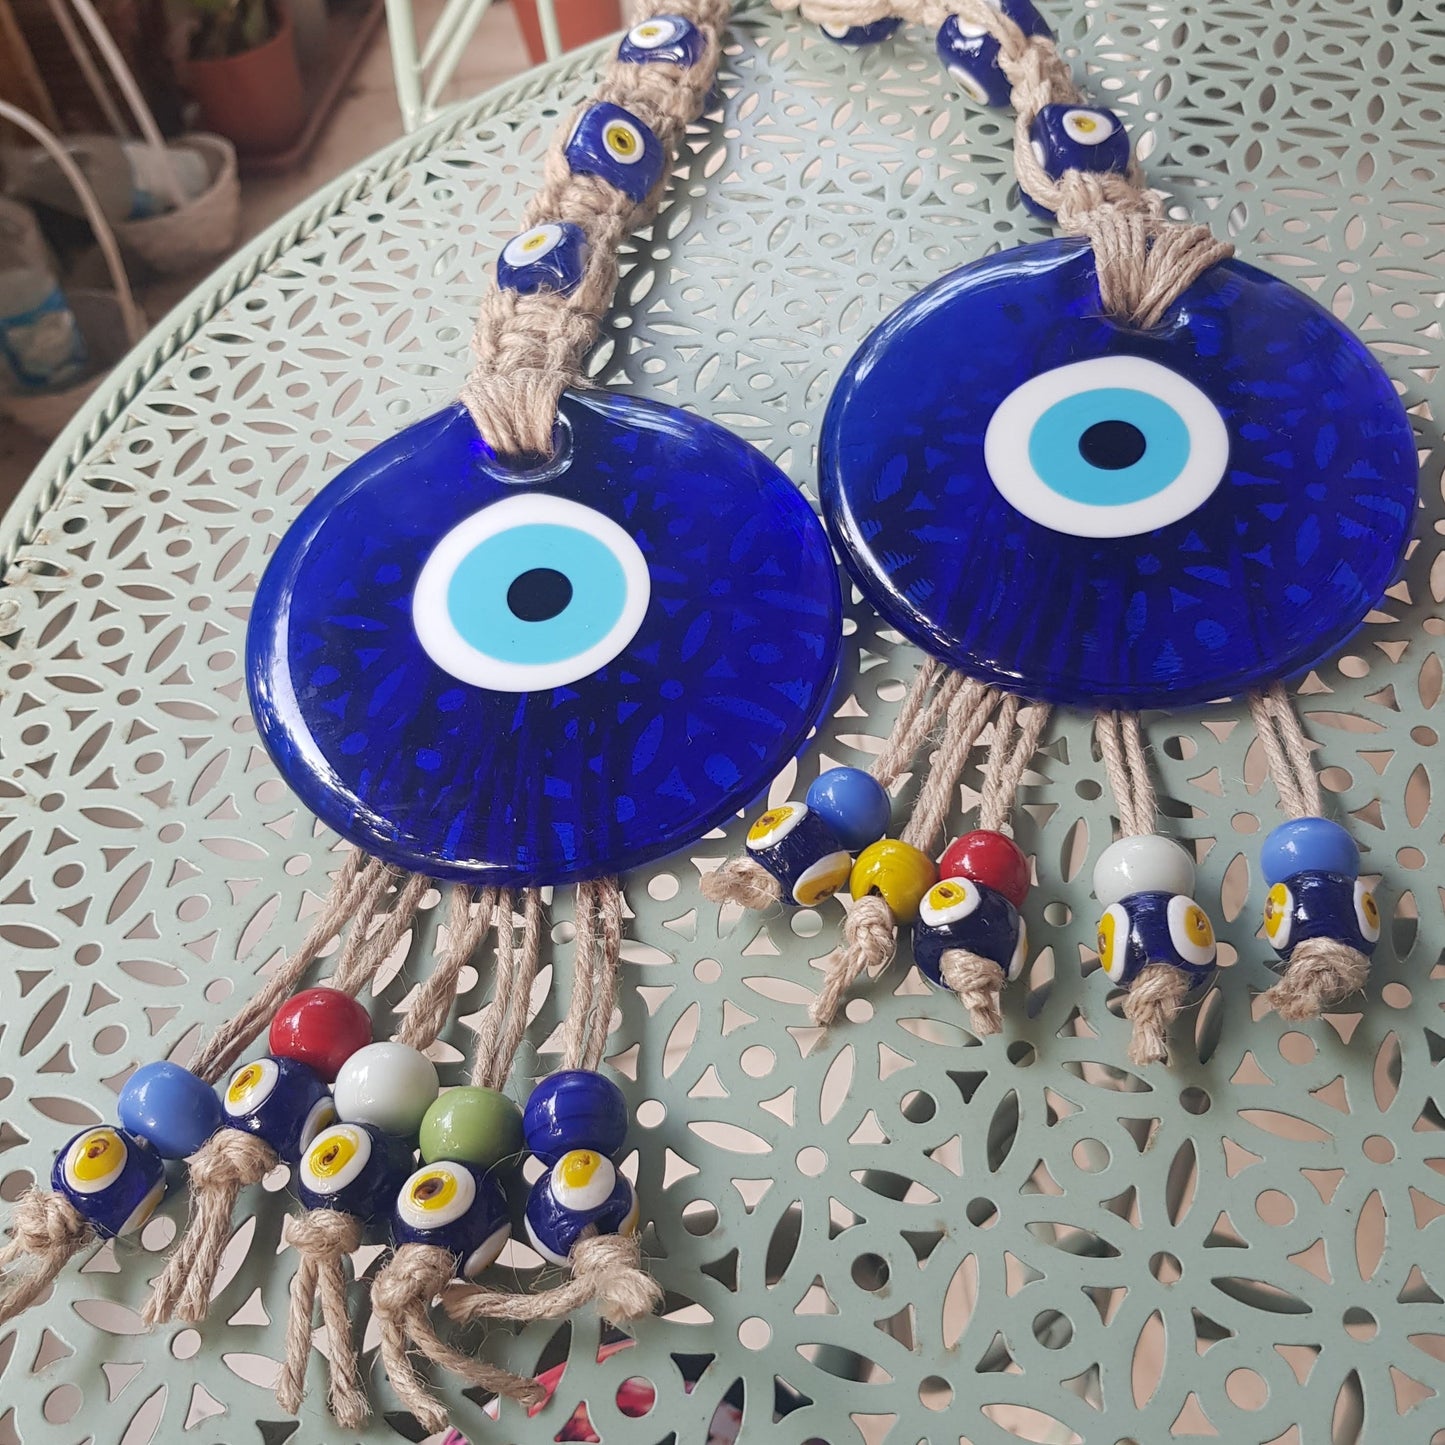 Bluenoemi Jewelry Home-Decor Blue Glass Evil Eye Souvenir Luck and Blue Eyes Symbols and beads on a rope.